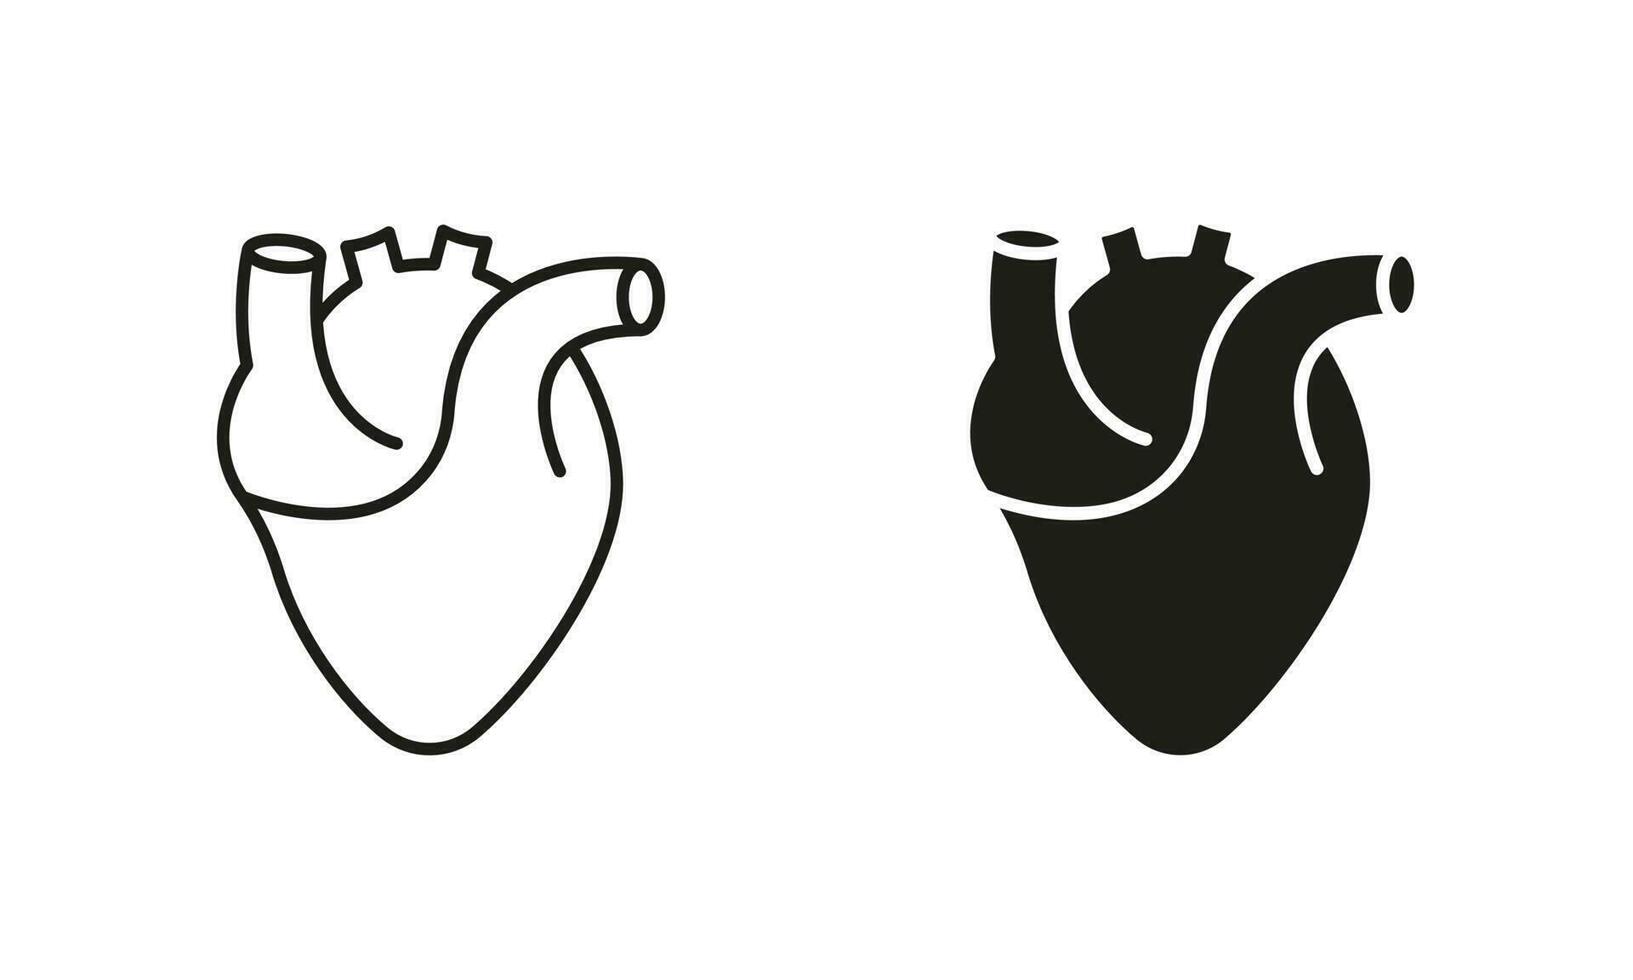 Medical Cardiology Pictogram. Healthy Cardiovascular Organ Symbol Collection on White Background. Human Heart, Cardiac Muscle Line and Silhouette Icon Set. Isolated Vector Illustration.